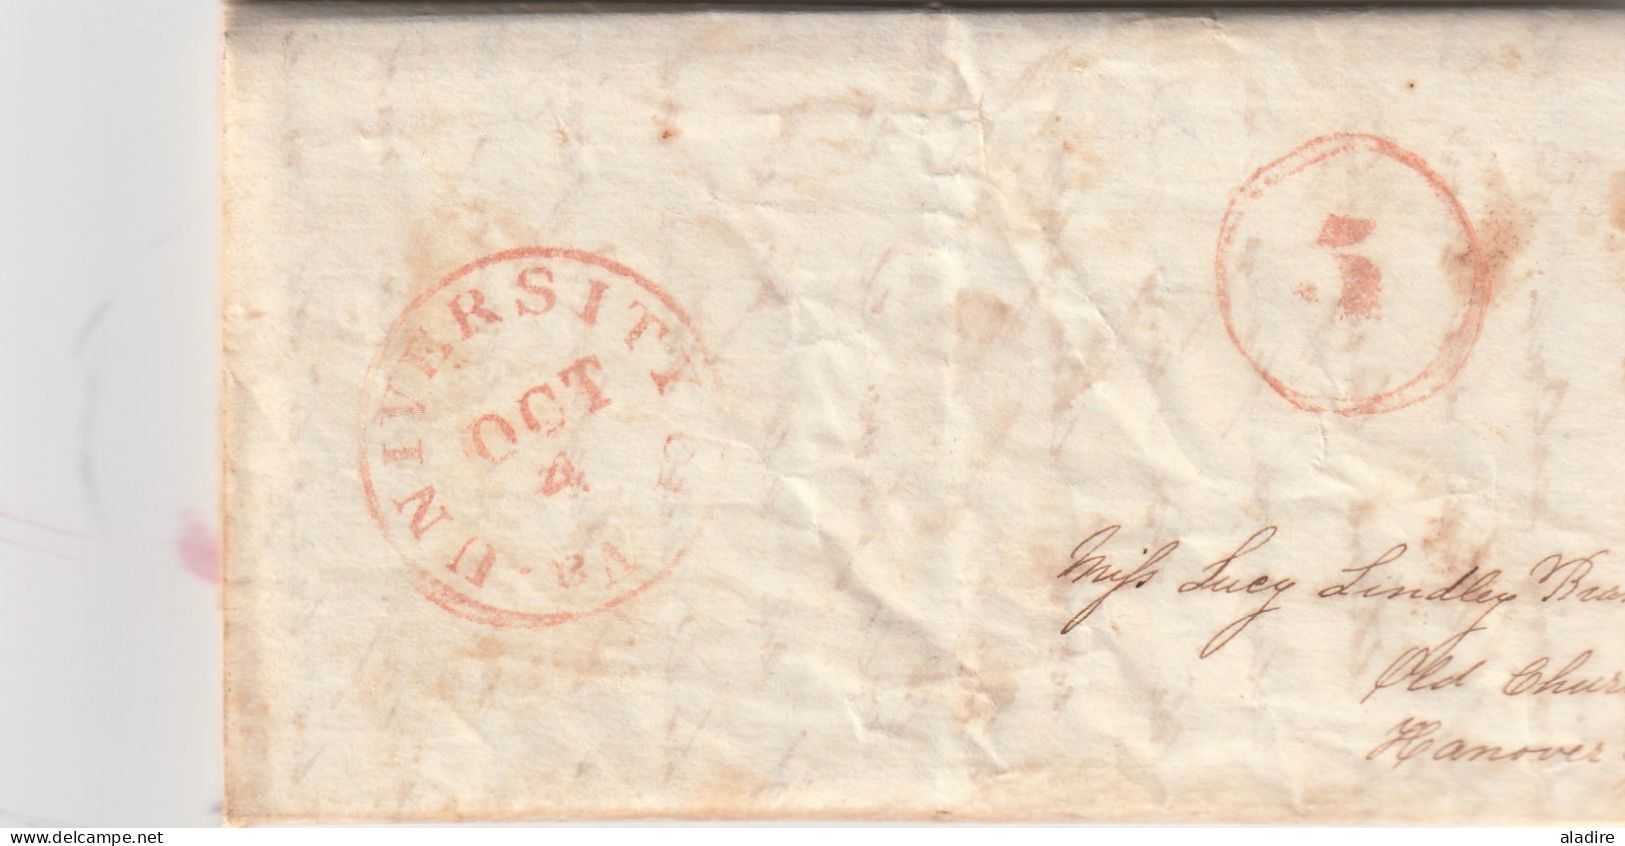 USA - 1809 / 1838 - collection of 7 letters with text - various origins and destinations